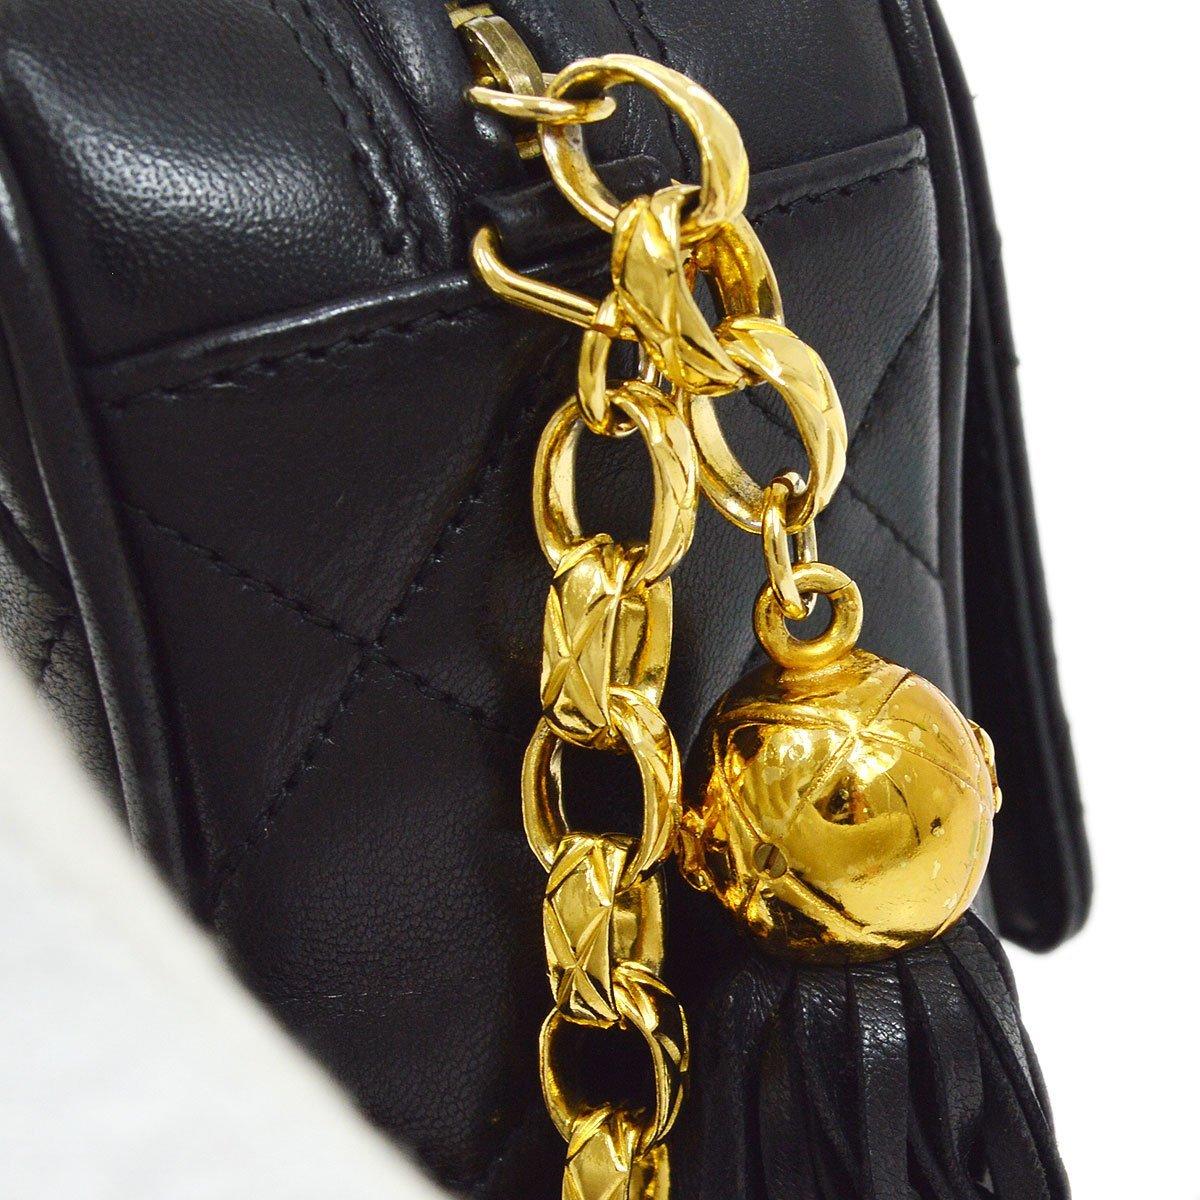 Pre-Owned Vintage Condition
From 1996 Collection
Lambskin Leather
Gold Tone Hardware
Measures 7.5